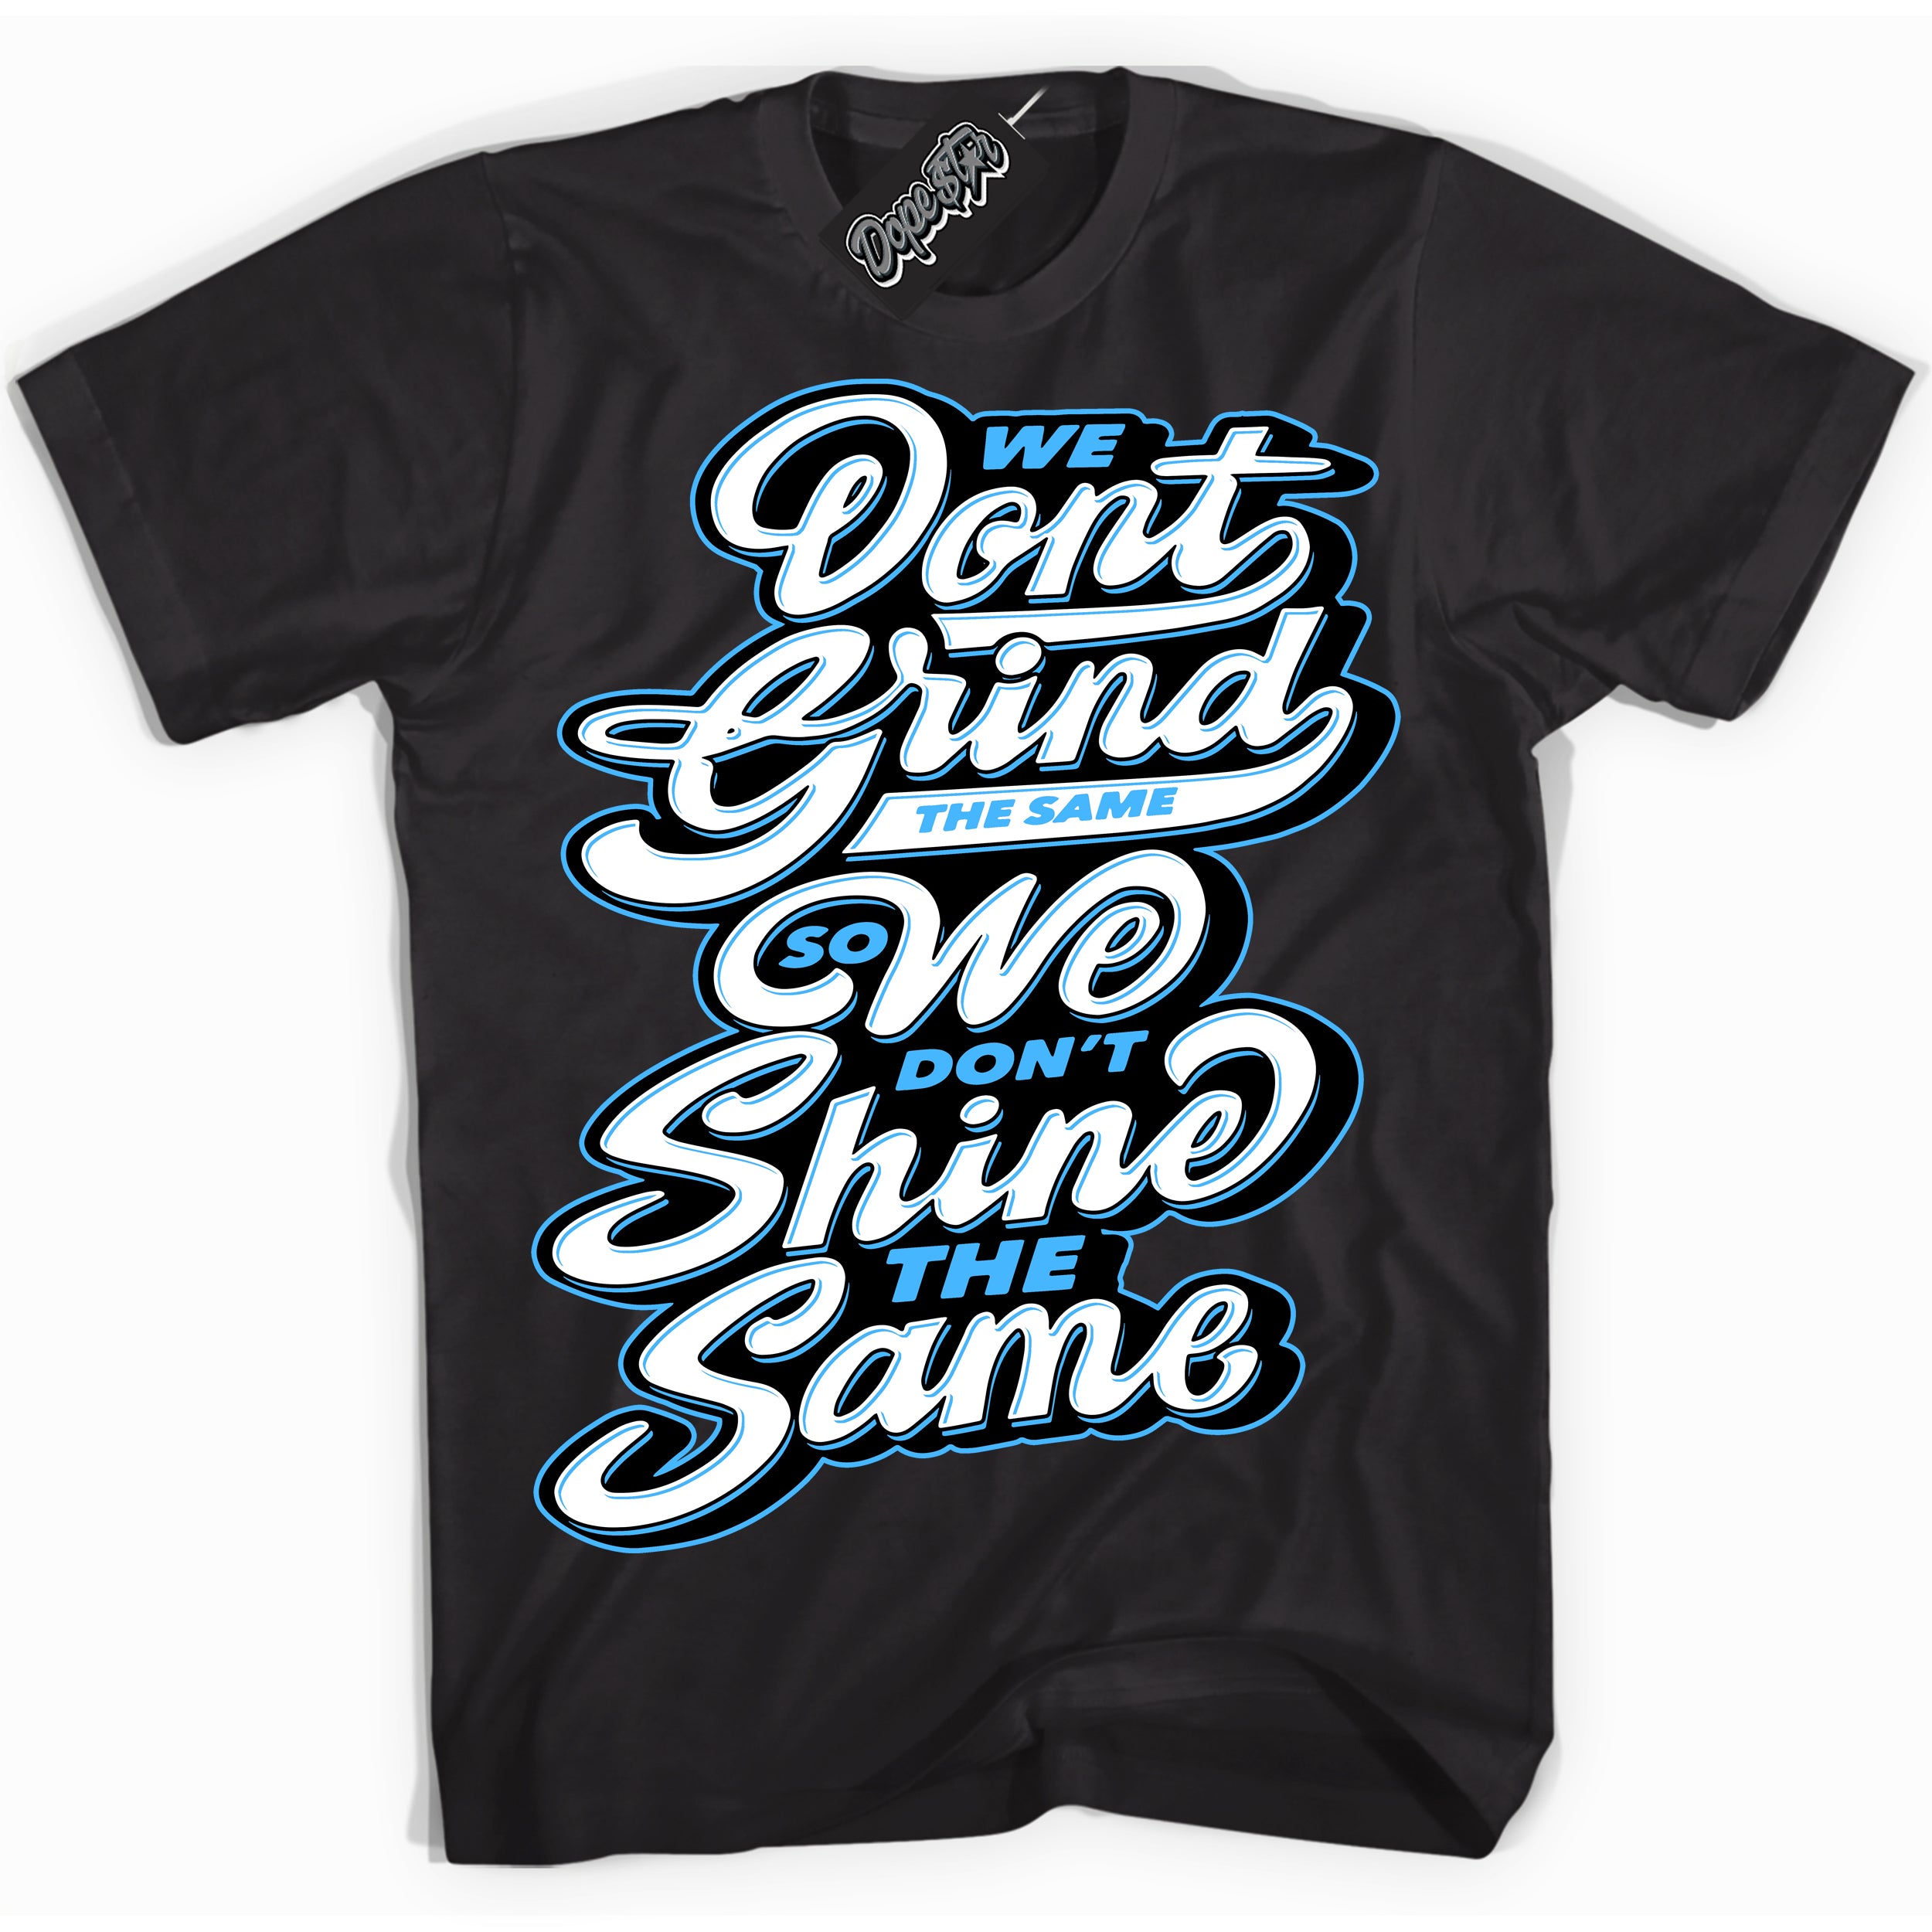 Cool Black graphic tee with “ Grind Shine ” design, that perfectly matches Powder Blue 9s sneakers 